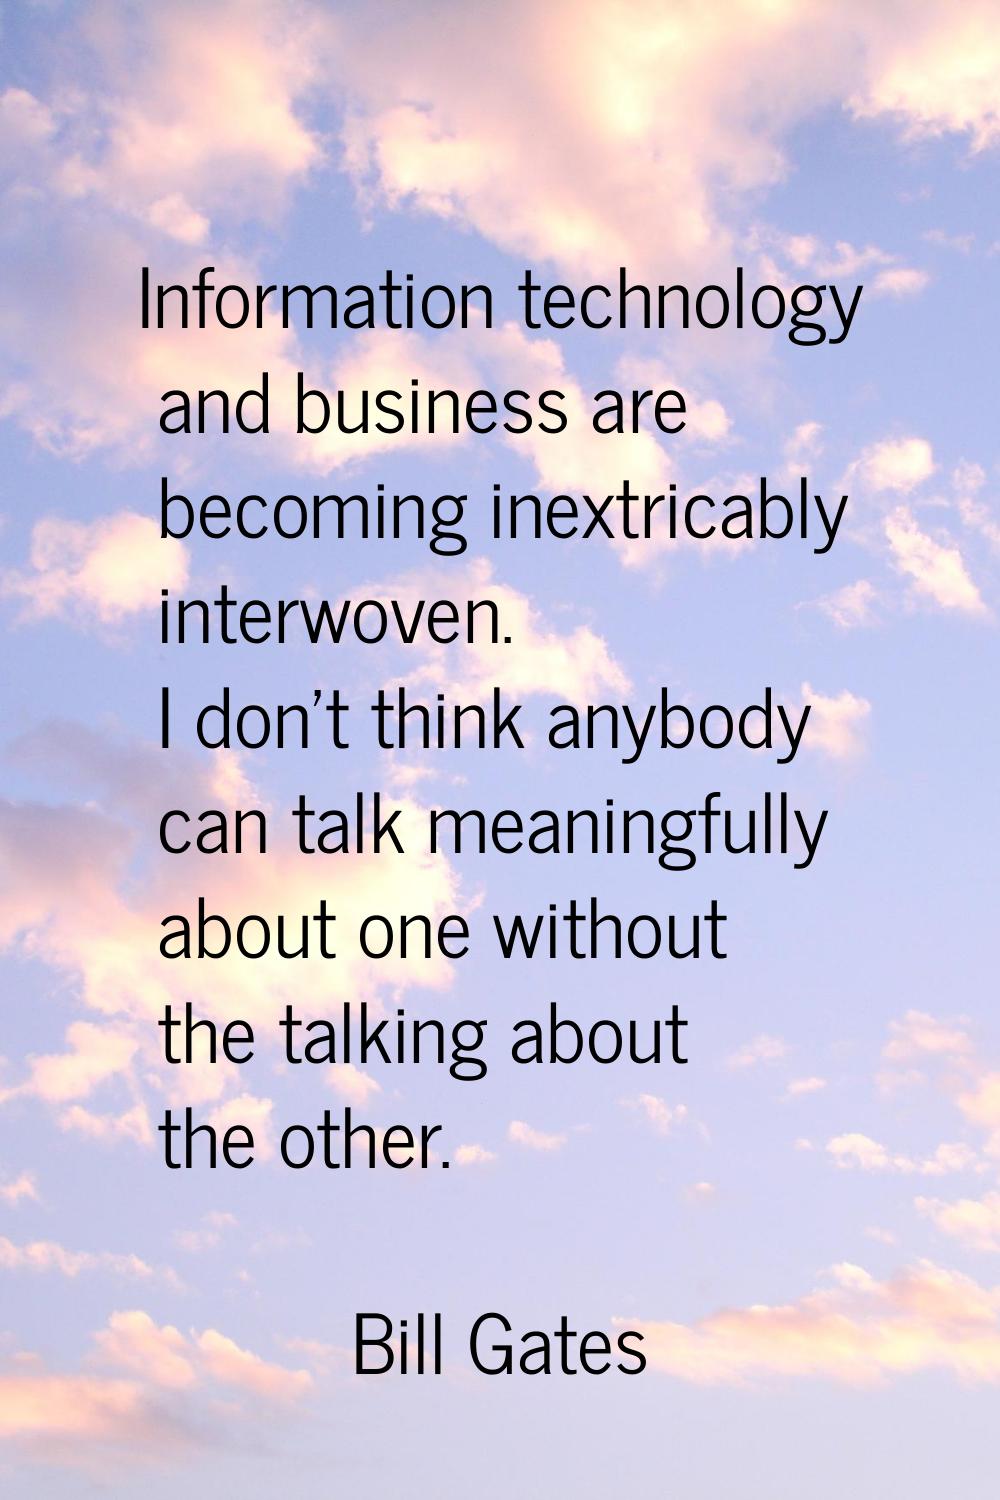 Information technology and business are becoming inextricably interwoven. I don't think anybody can